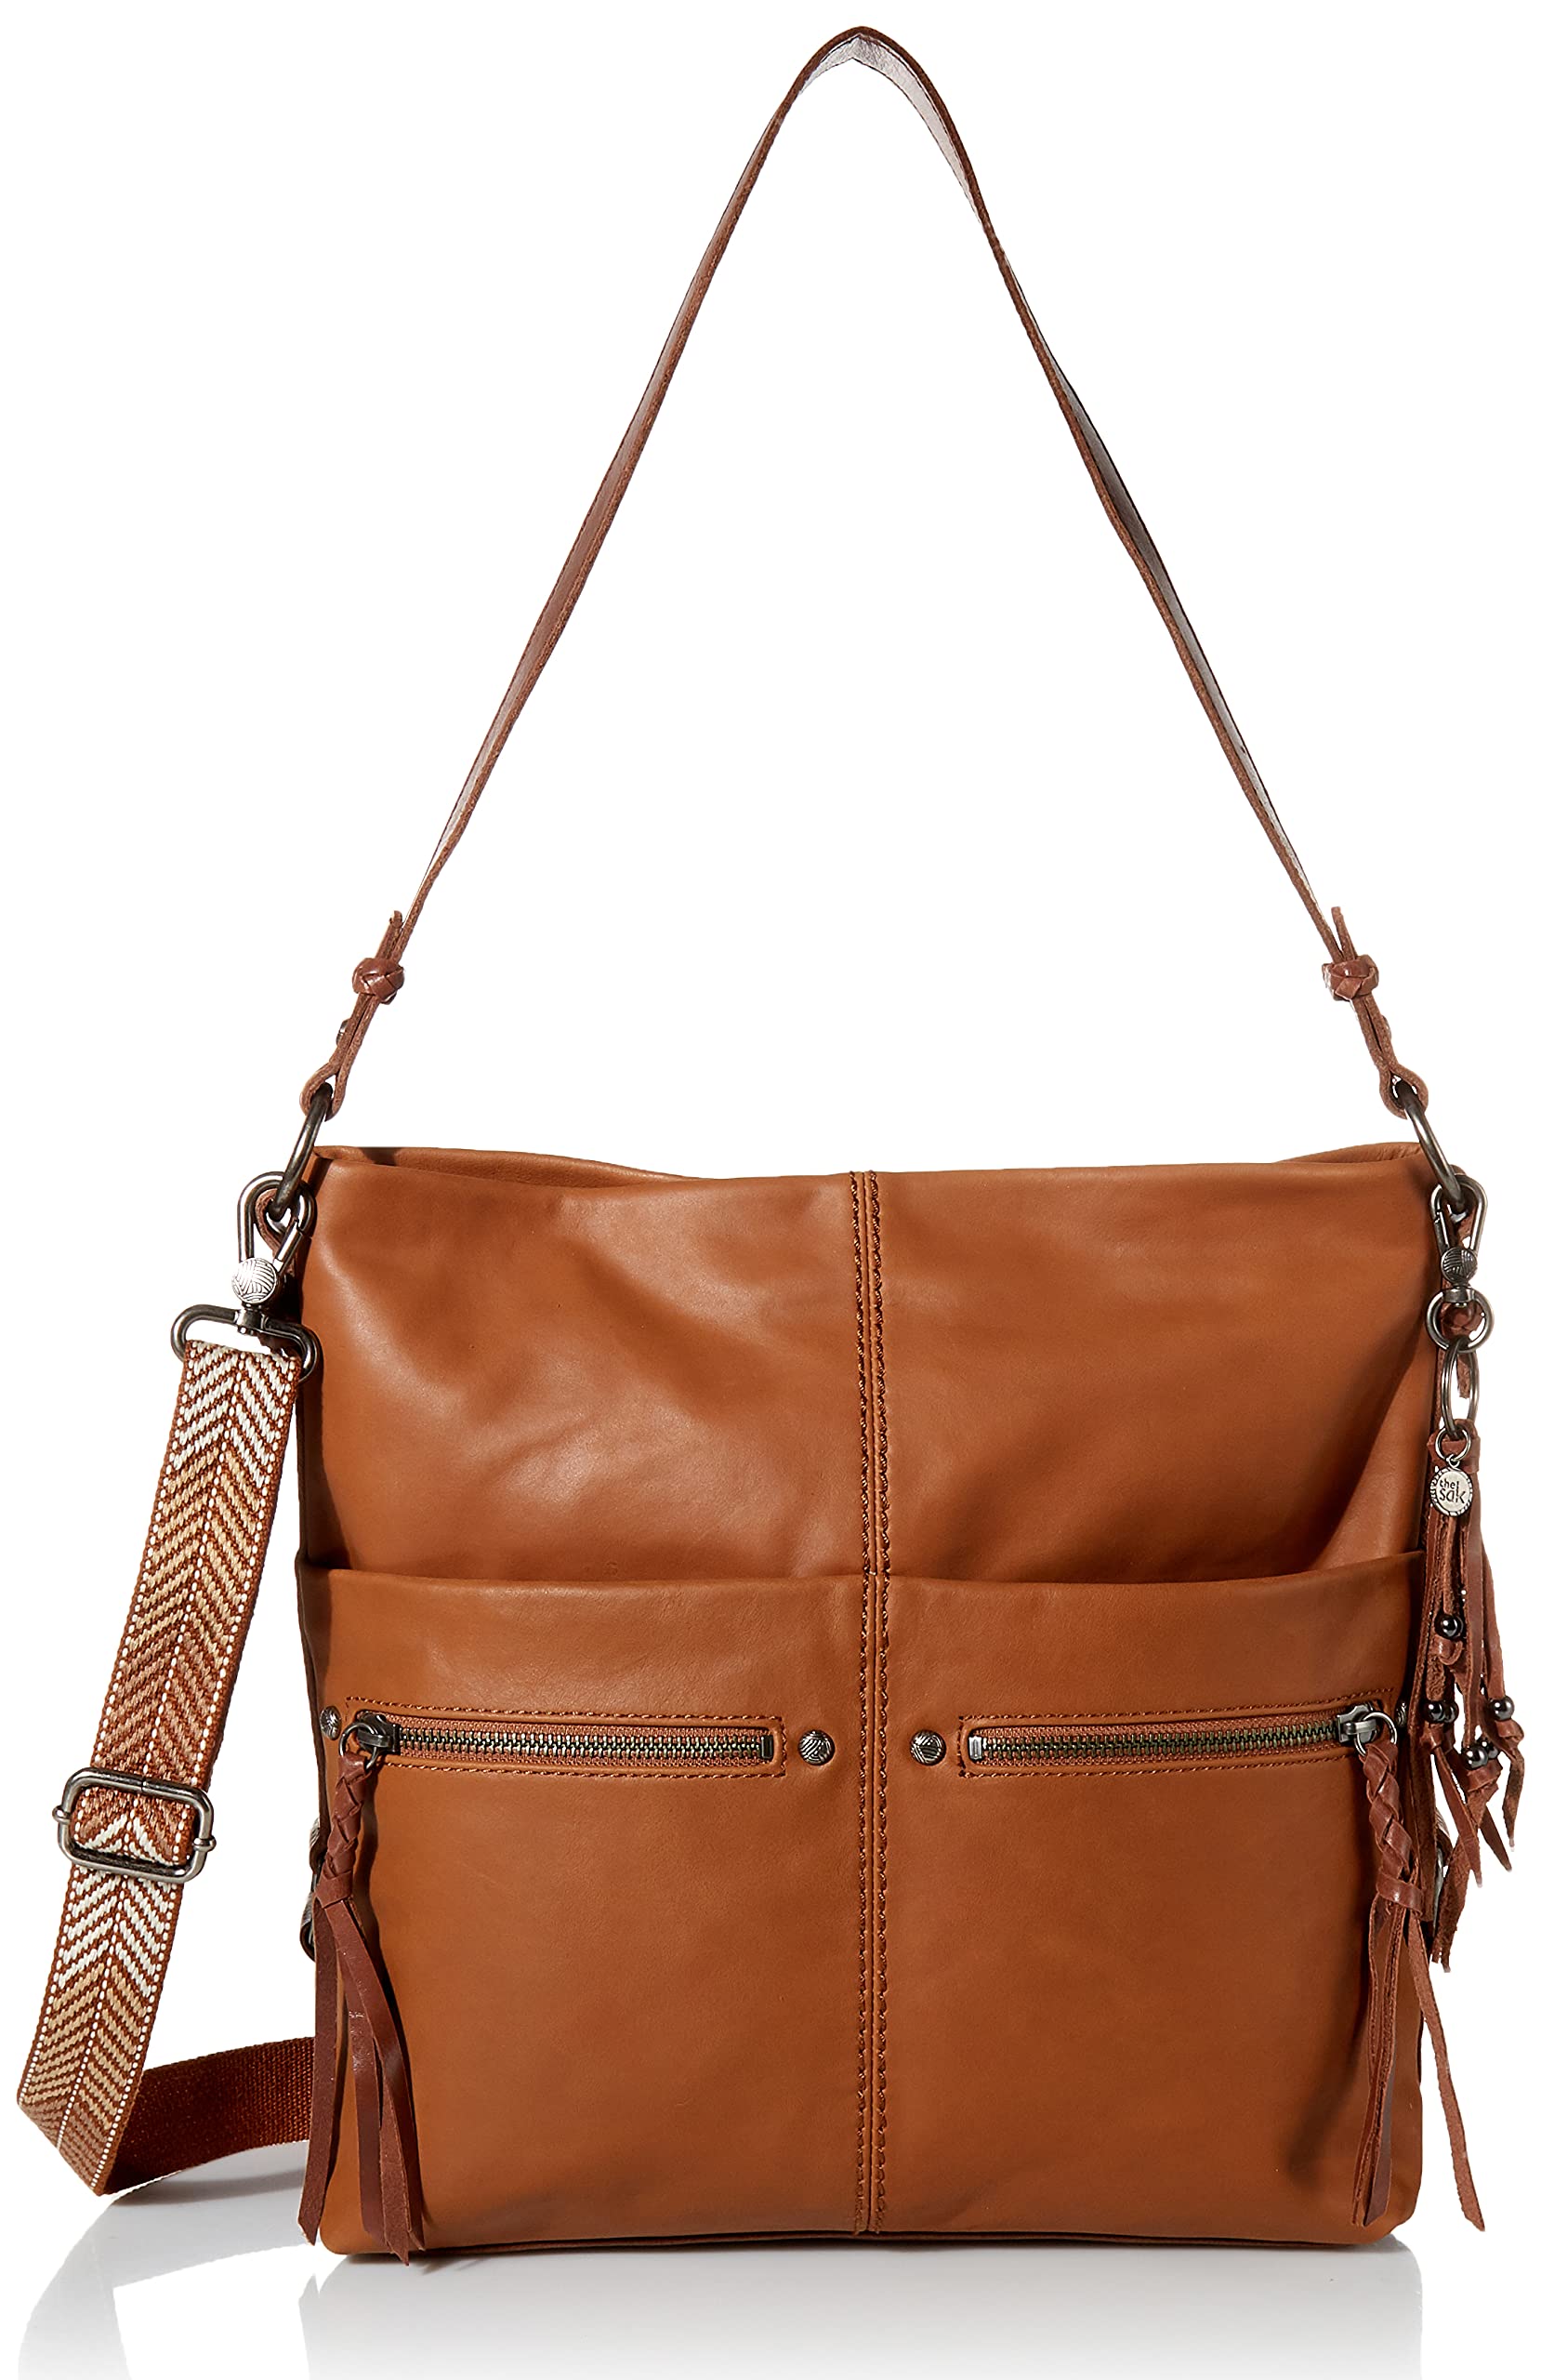 The Sak Ashland Bucket Bag in Leather, Casual Everyday Purse with Removable Crossbody Strap, Handcrafted & Sustainably-Made